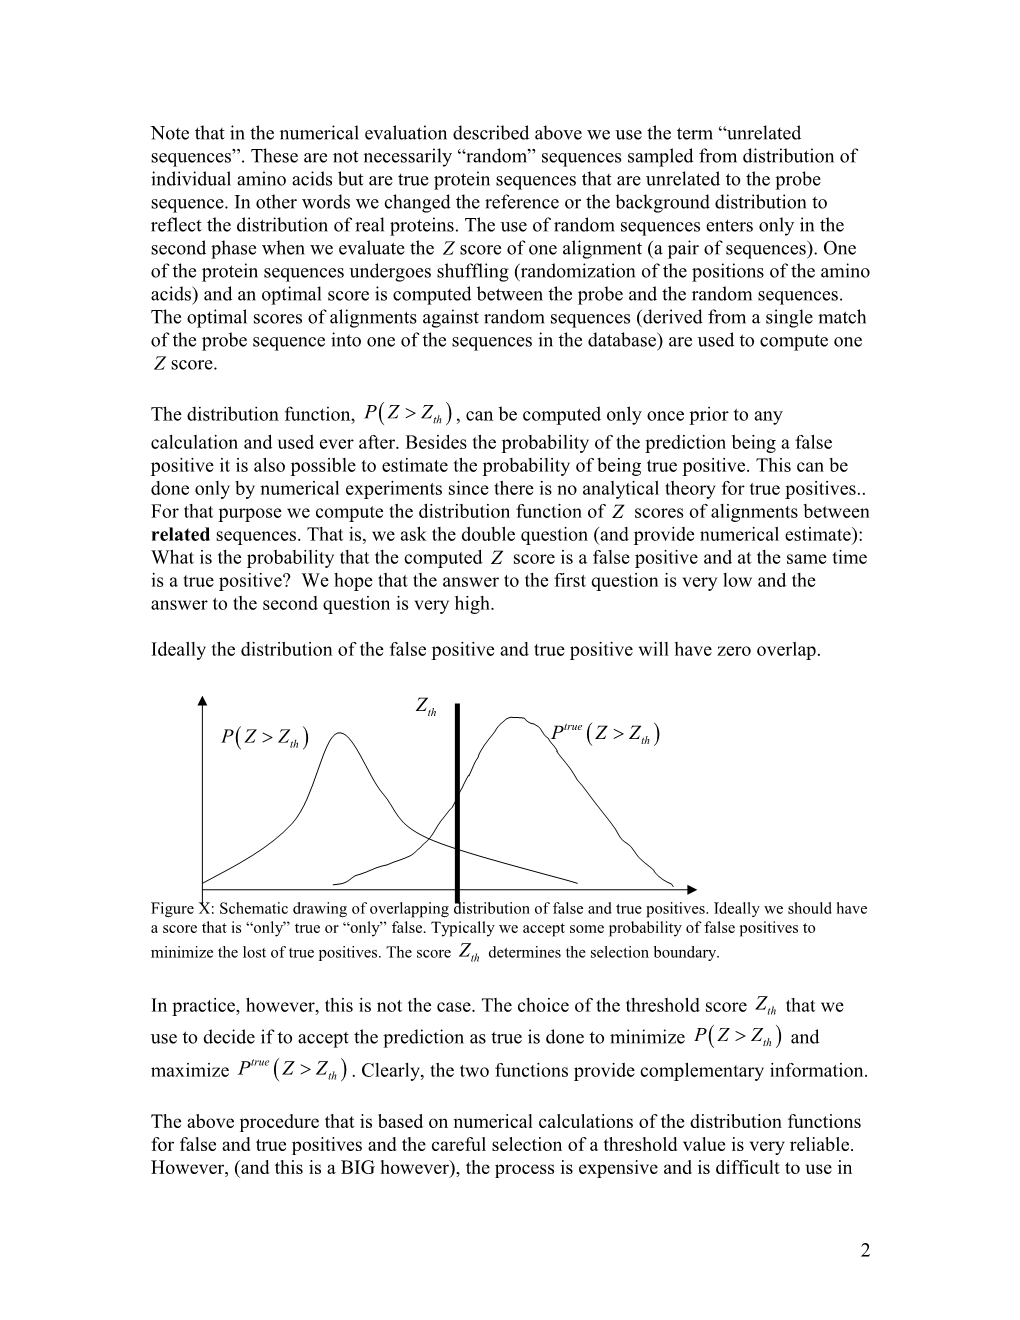 Statistical Analysis of Sequences